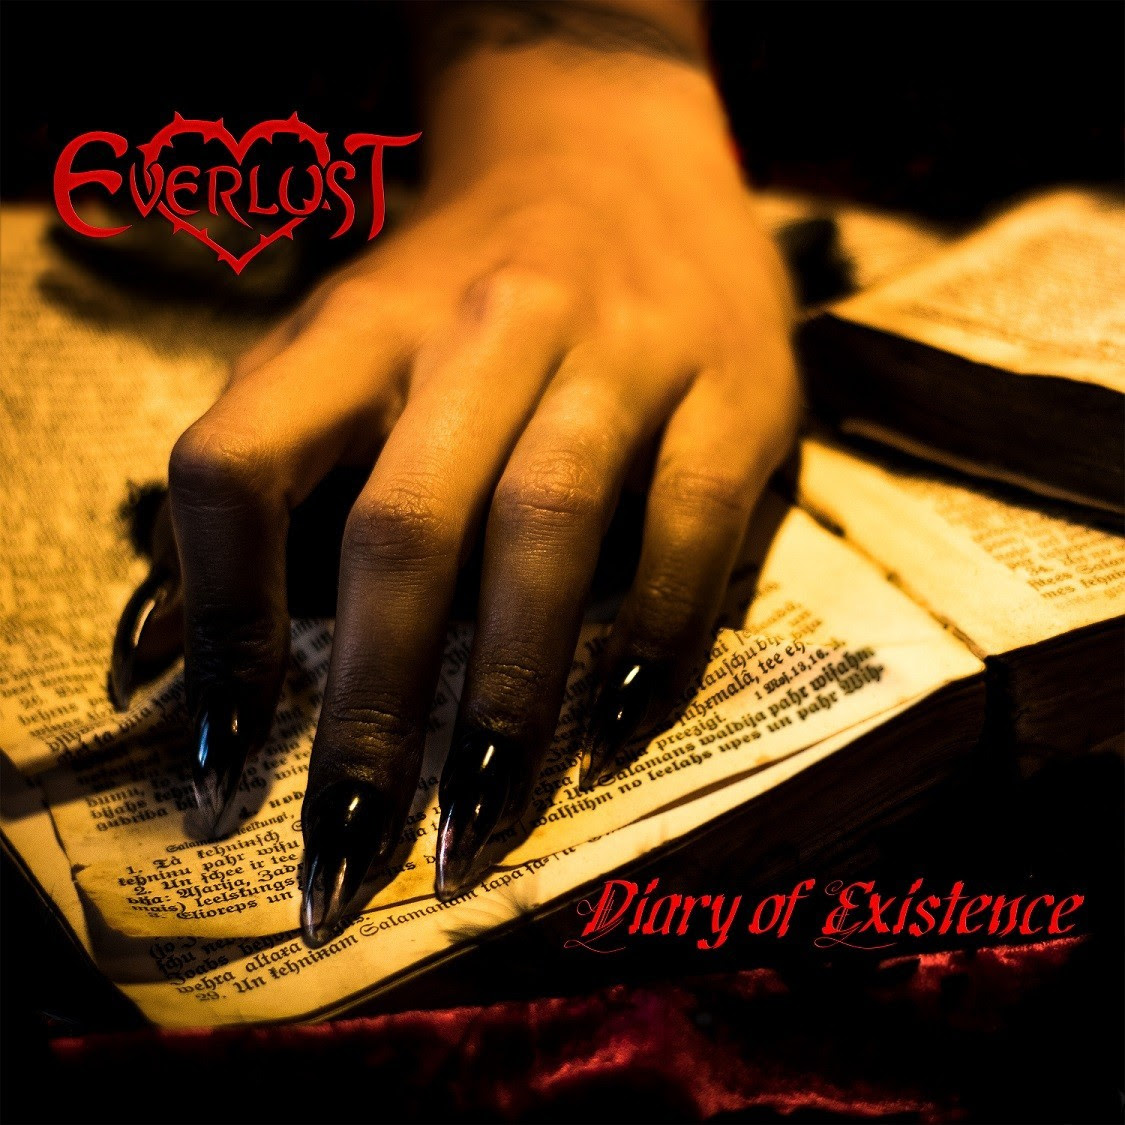 Reseña – review: Everlust “Diary Of Existence”